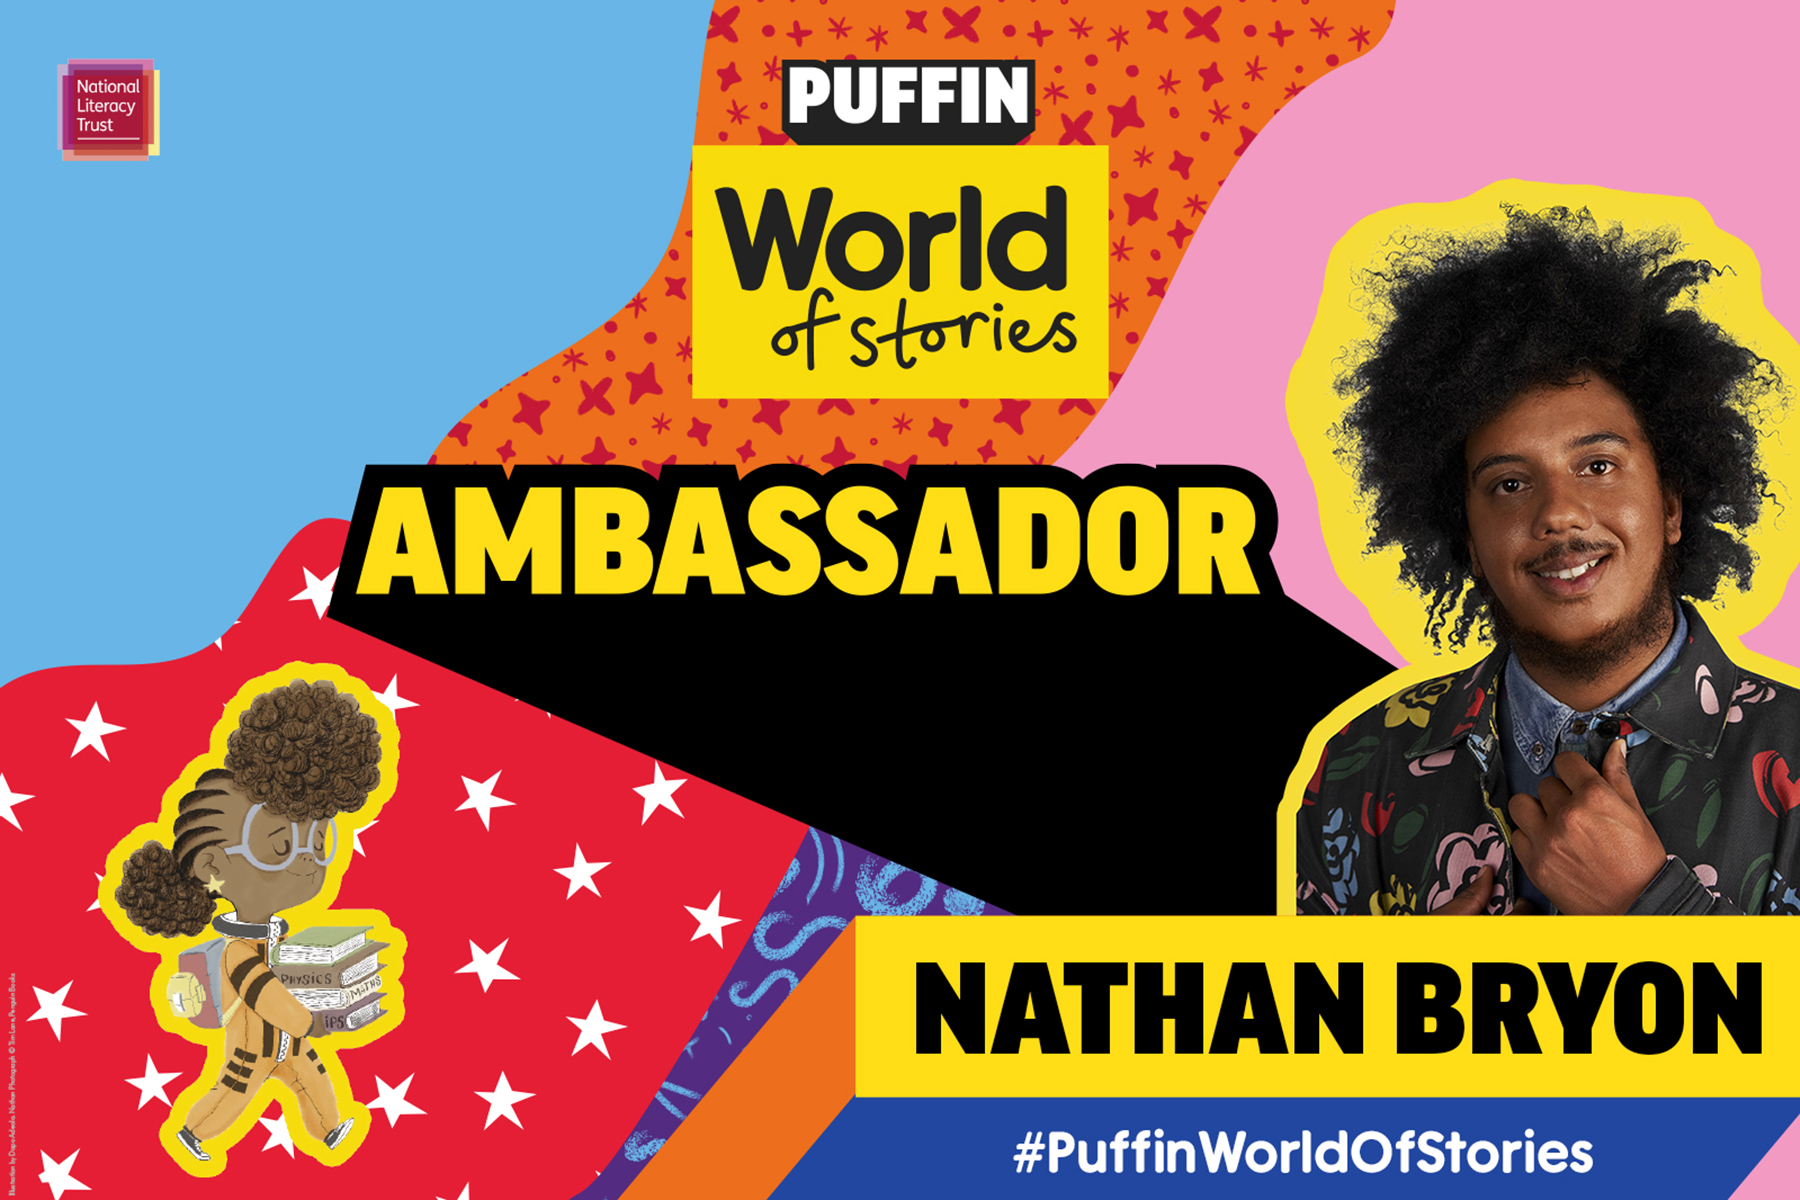 Photo of Nathan Bryon, Puffin World of Stories ambassador on a colourful background